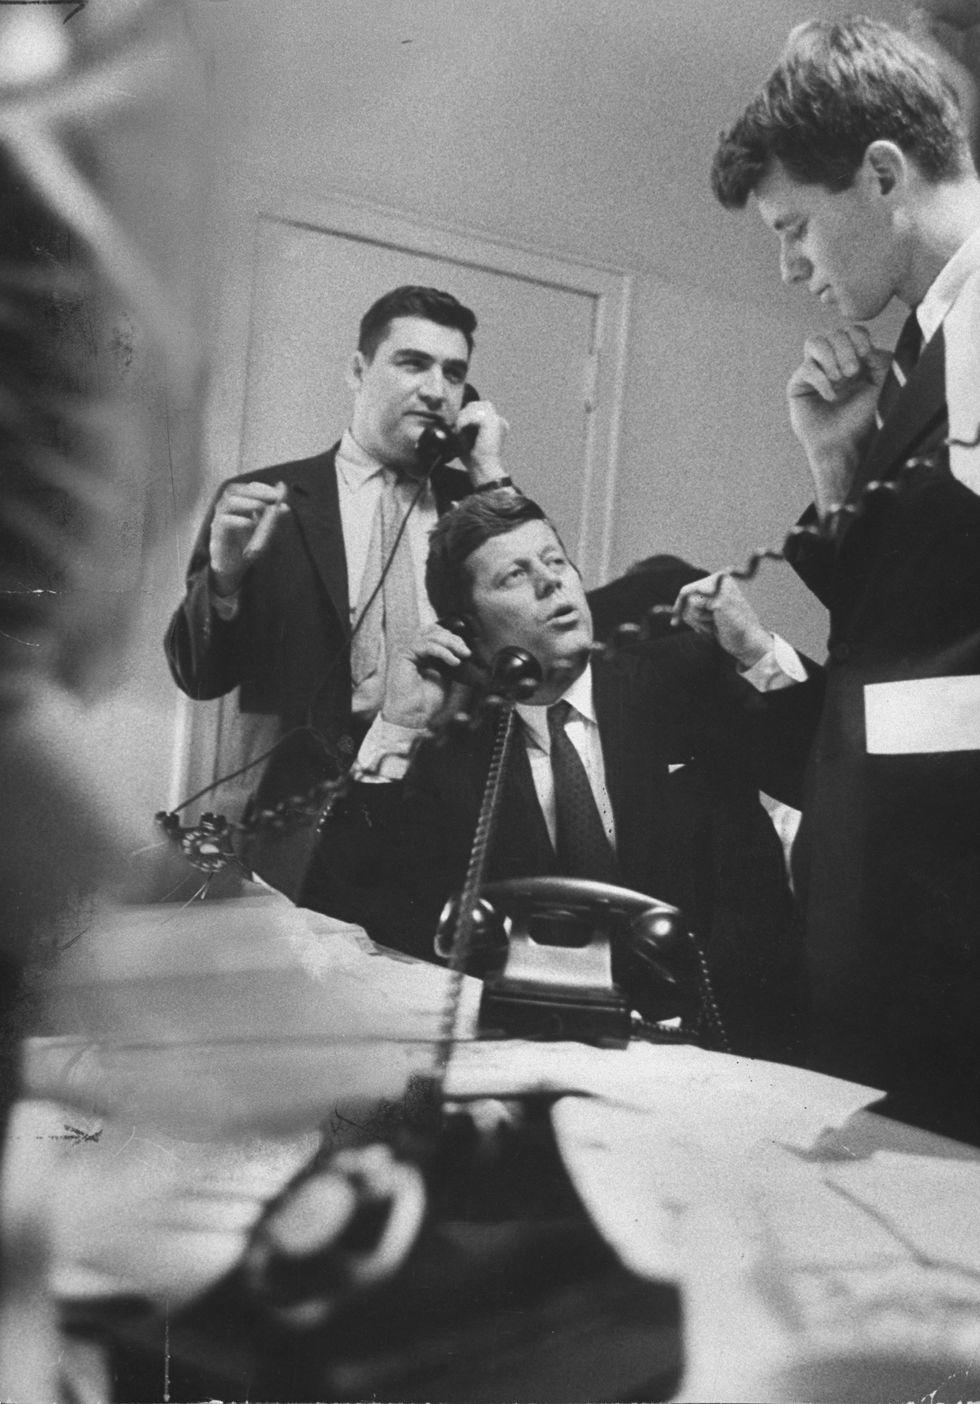 sen john f kennedy c in campaign headquarters on primary election night with his brother robert f kennedy r  photo by stan waymanthe life picture collection via getty images